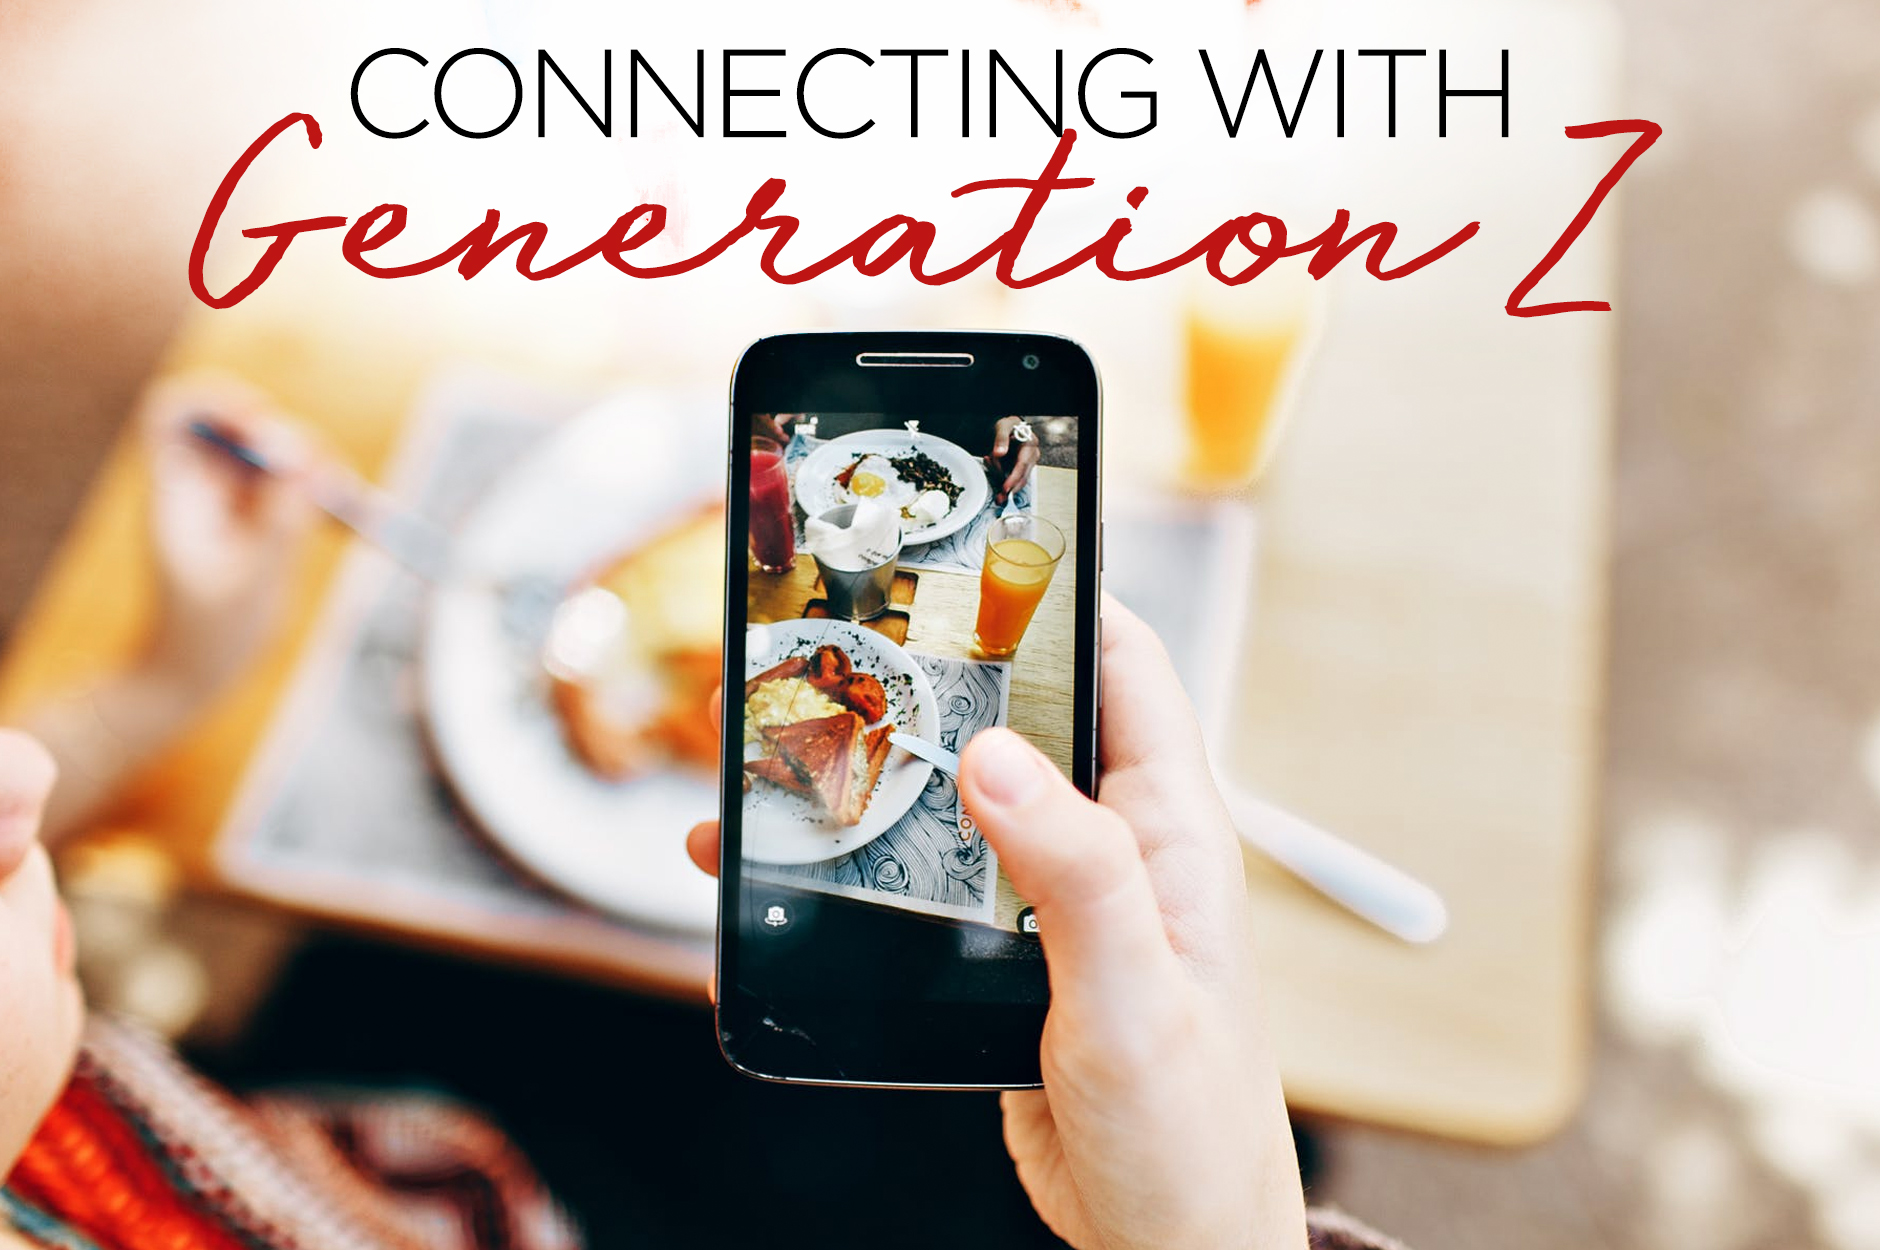 Connecting with Generation Z